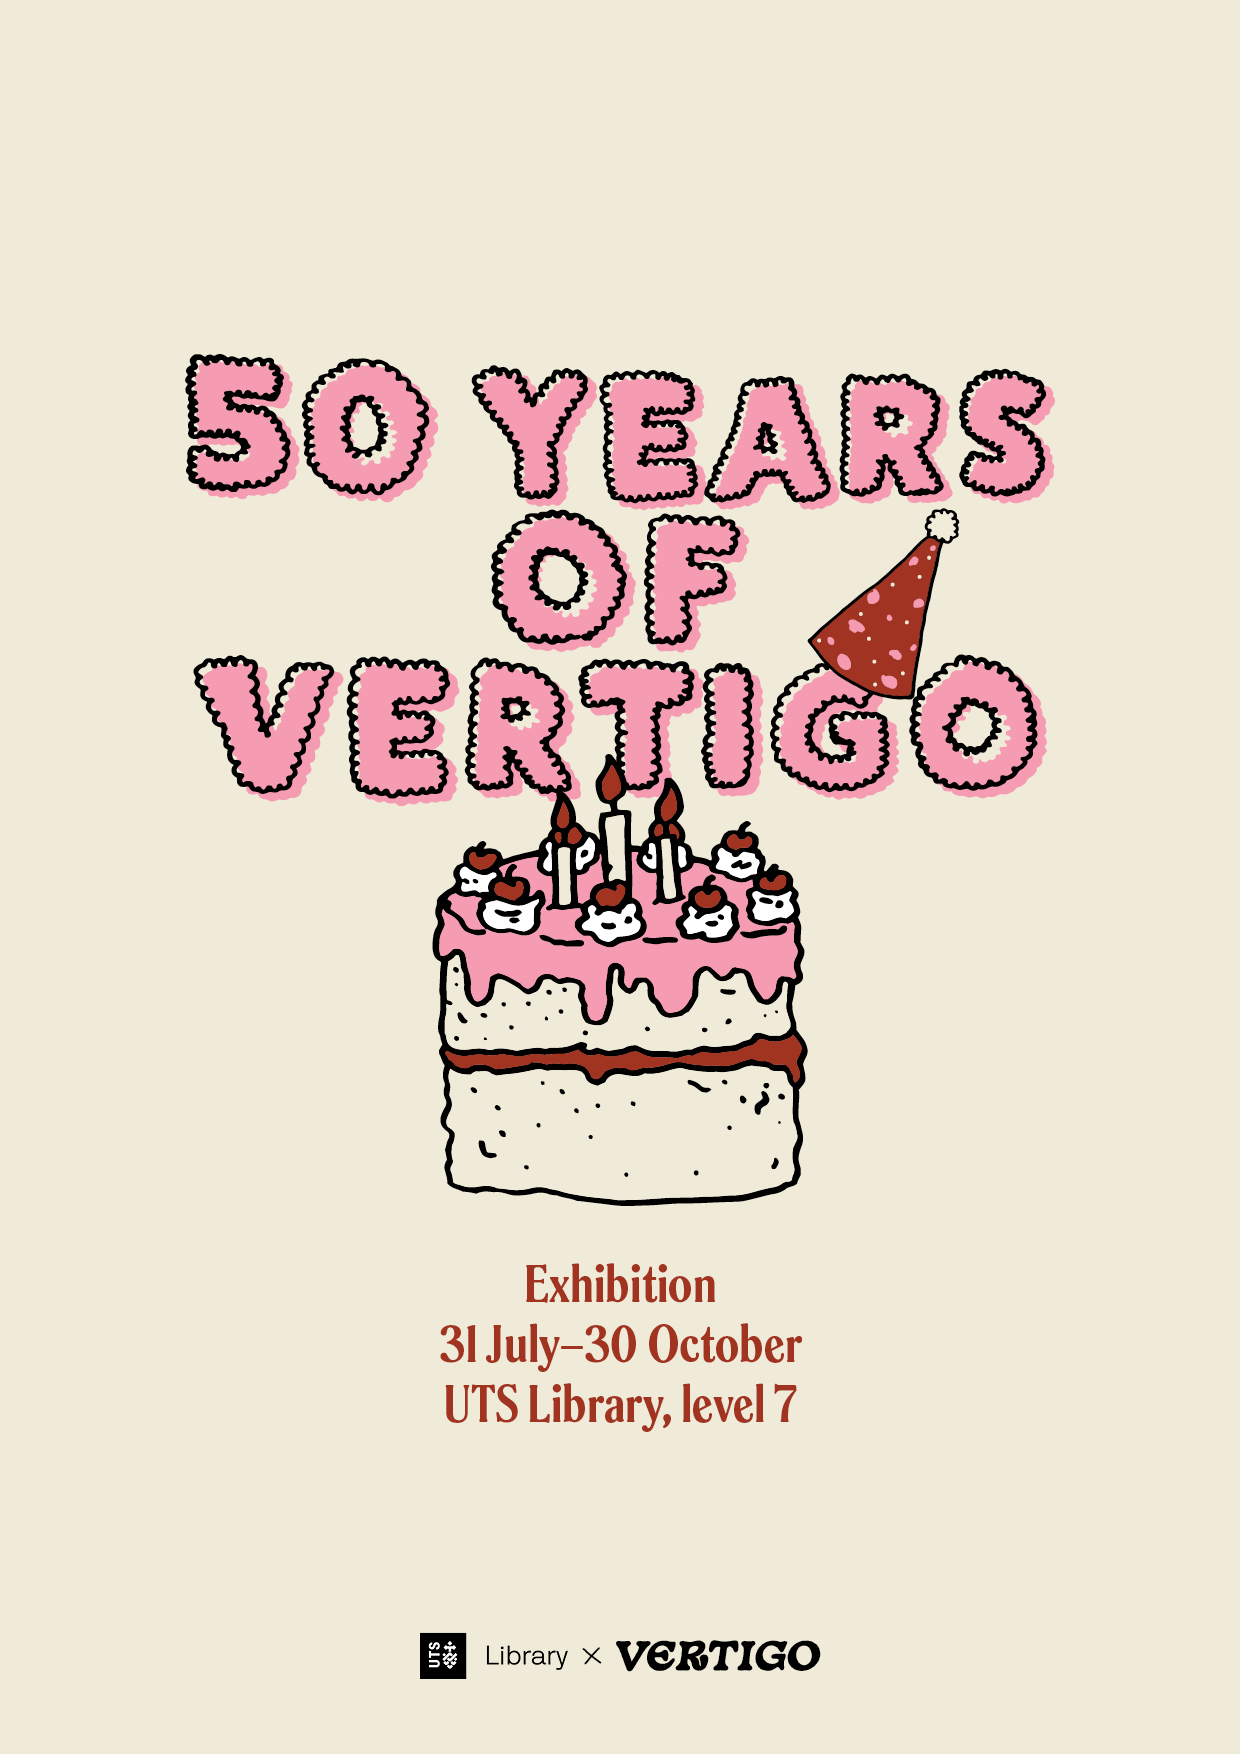 Pink hand-written bubble text states '50 years of 50 Vertigo' and wears a red party hat. Below, a double-sponge filled with jam is topped with pink icing, cream and cherries and birthday candles. The text 'Exhibition 31 July–30 October, UTS Library level 7' sits below the cake in red